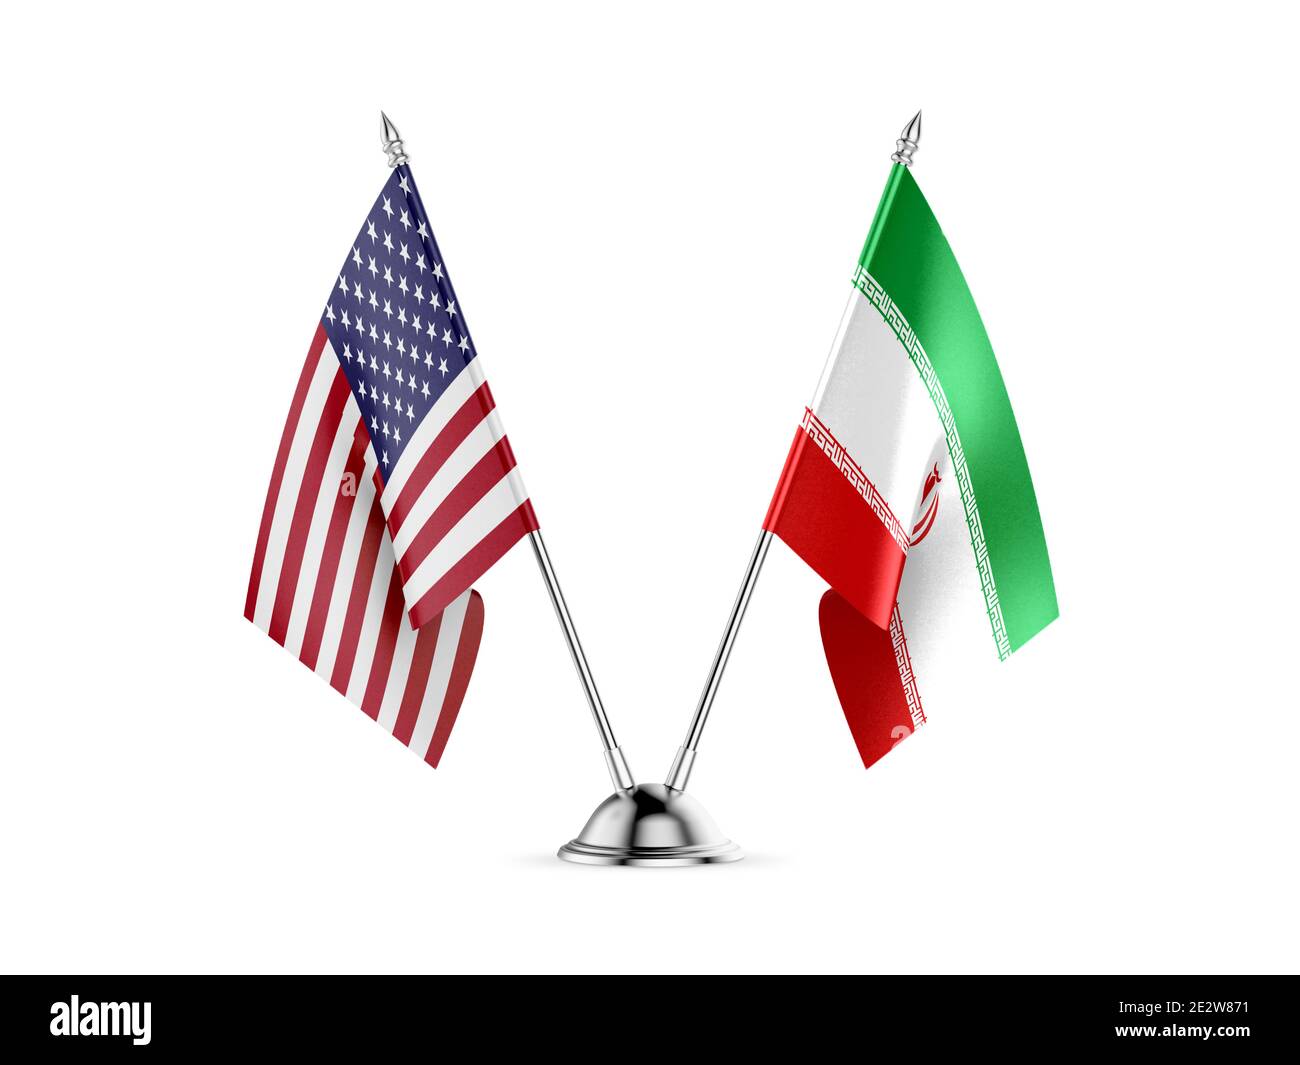 Desk flags, United States  America  and Iran, isolated on white background. 3d image Stock Photo